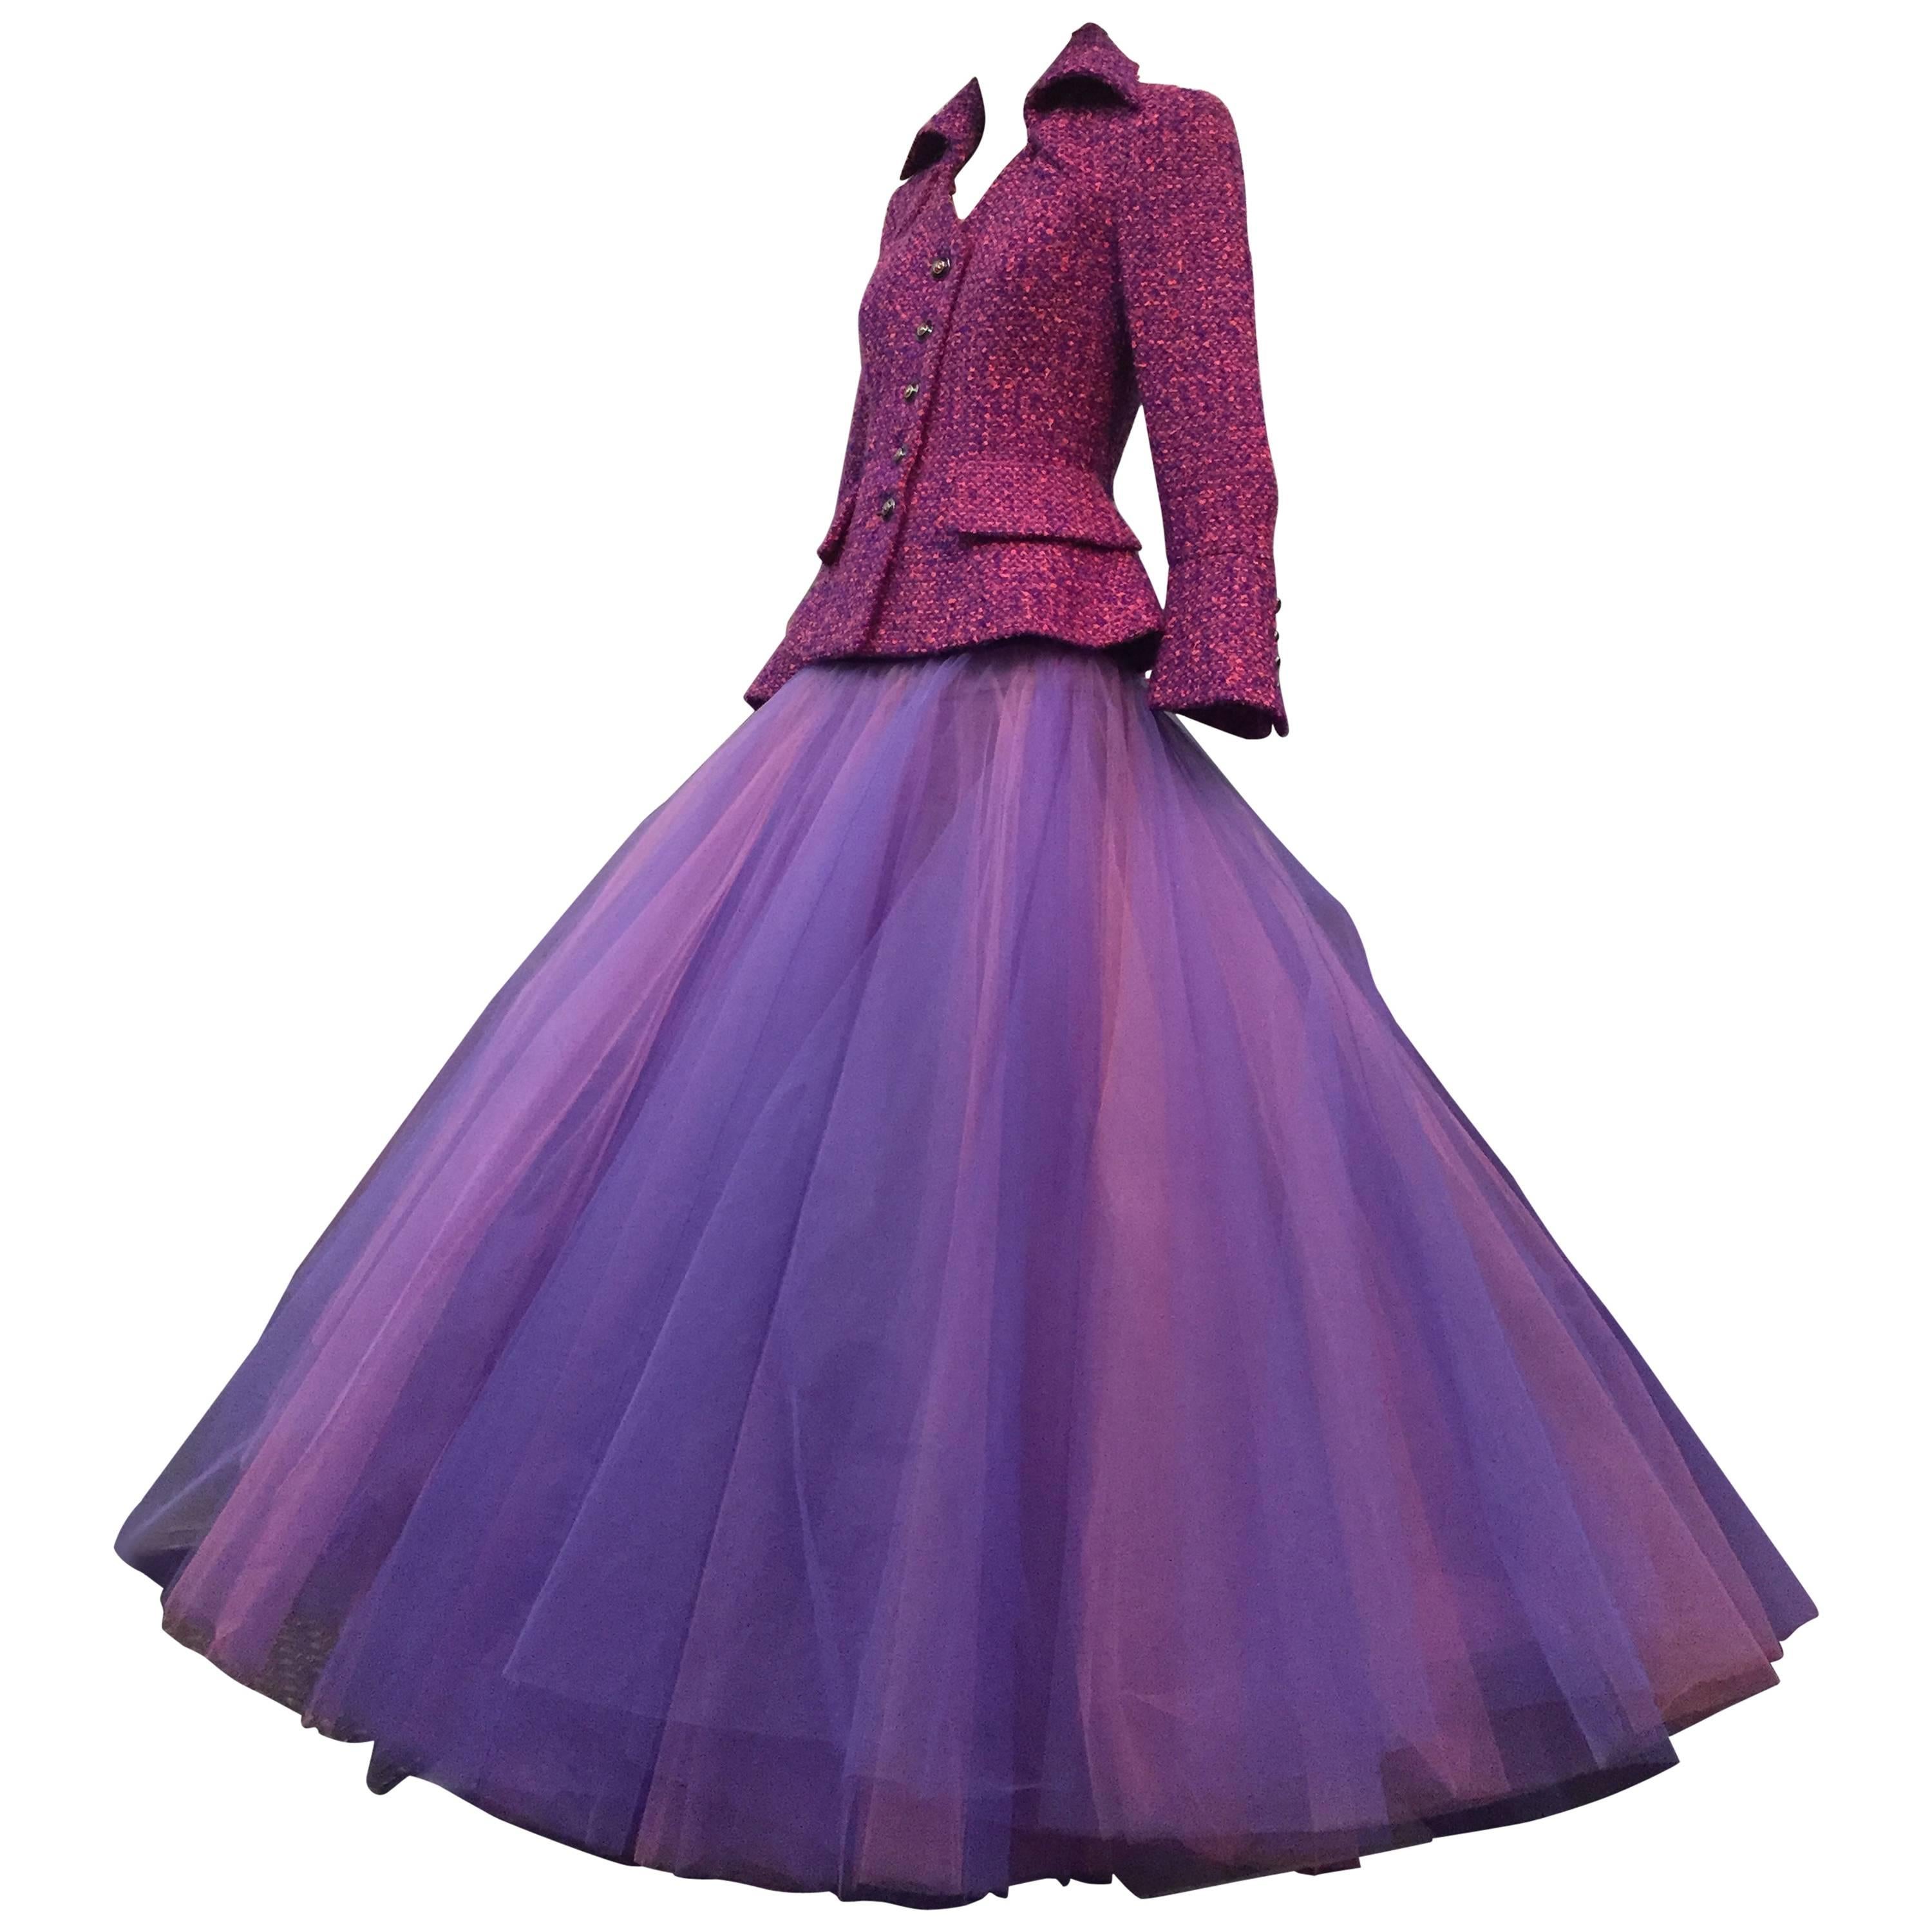 1990 JACQUES FATH Wool Tweed Jacket and Tulle Ball Skirt in Pink and Purple 